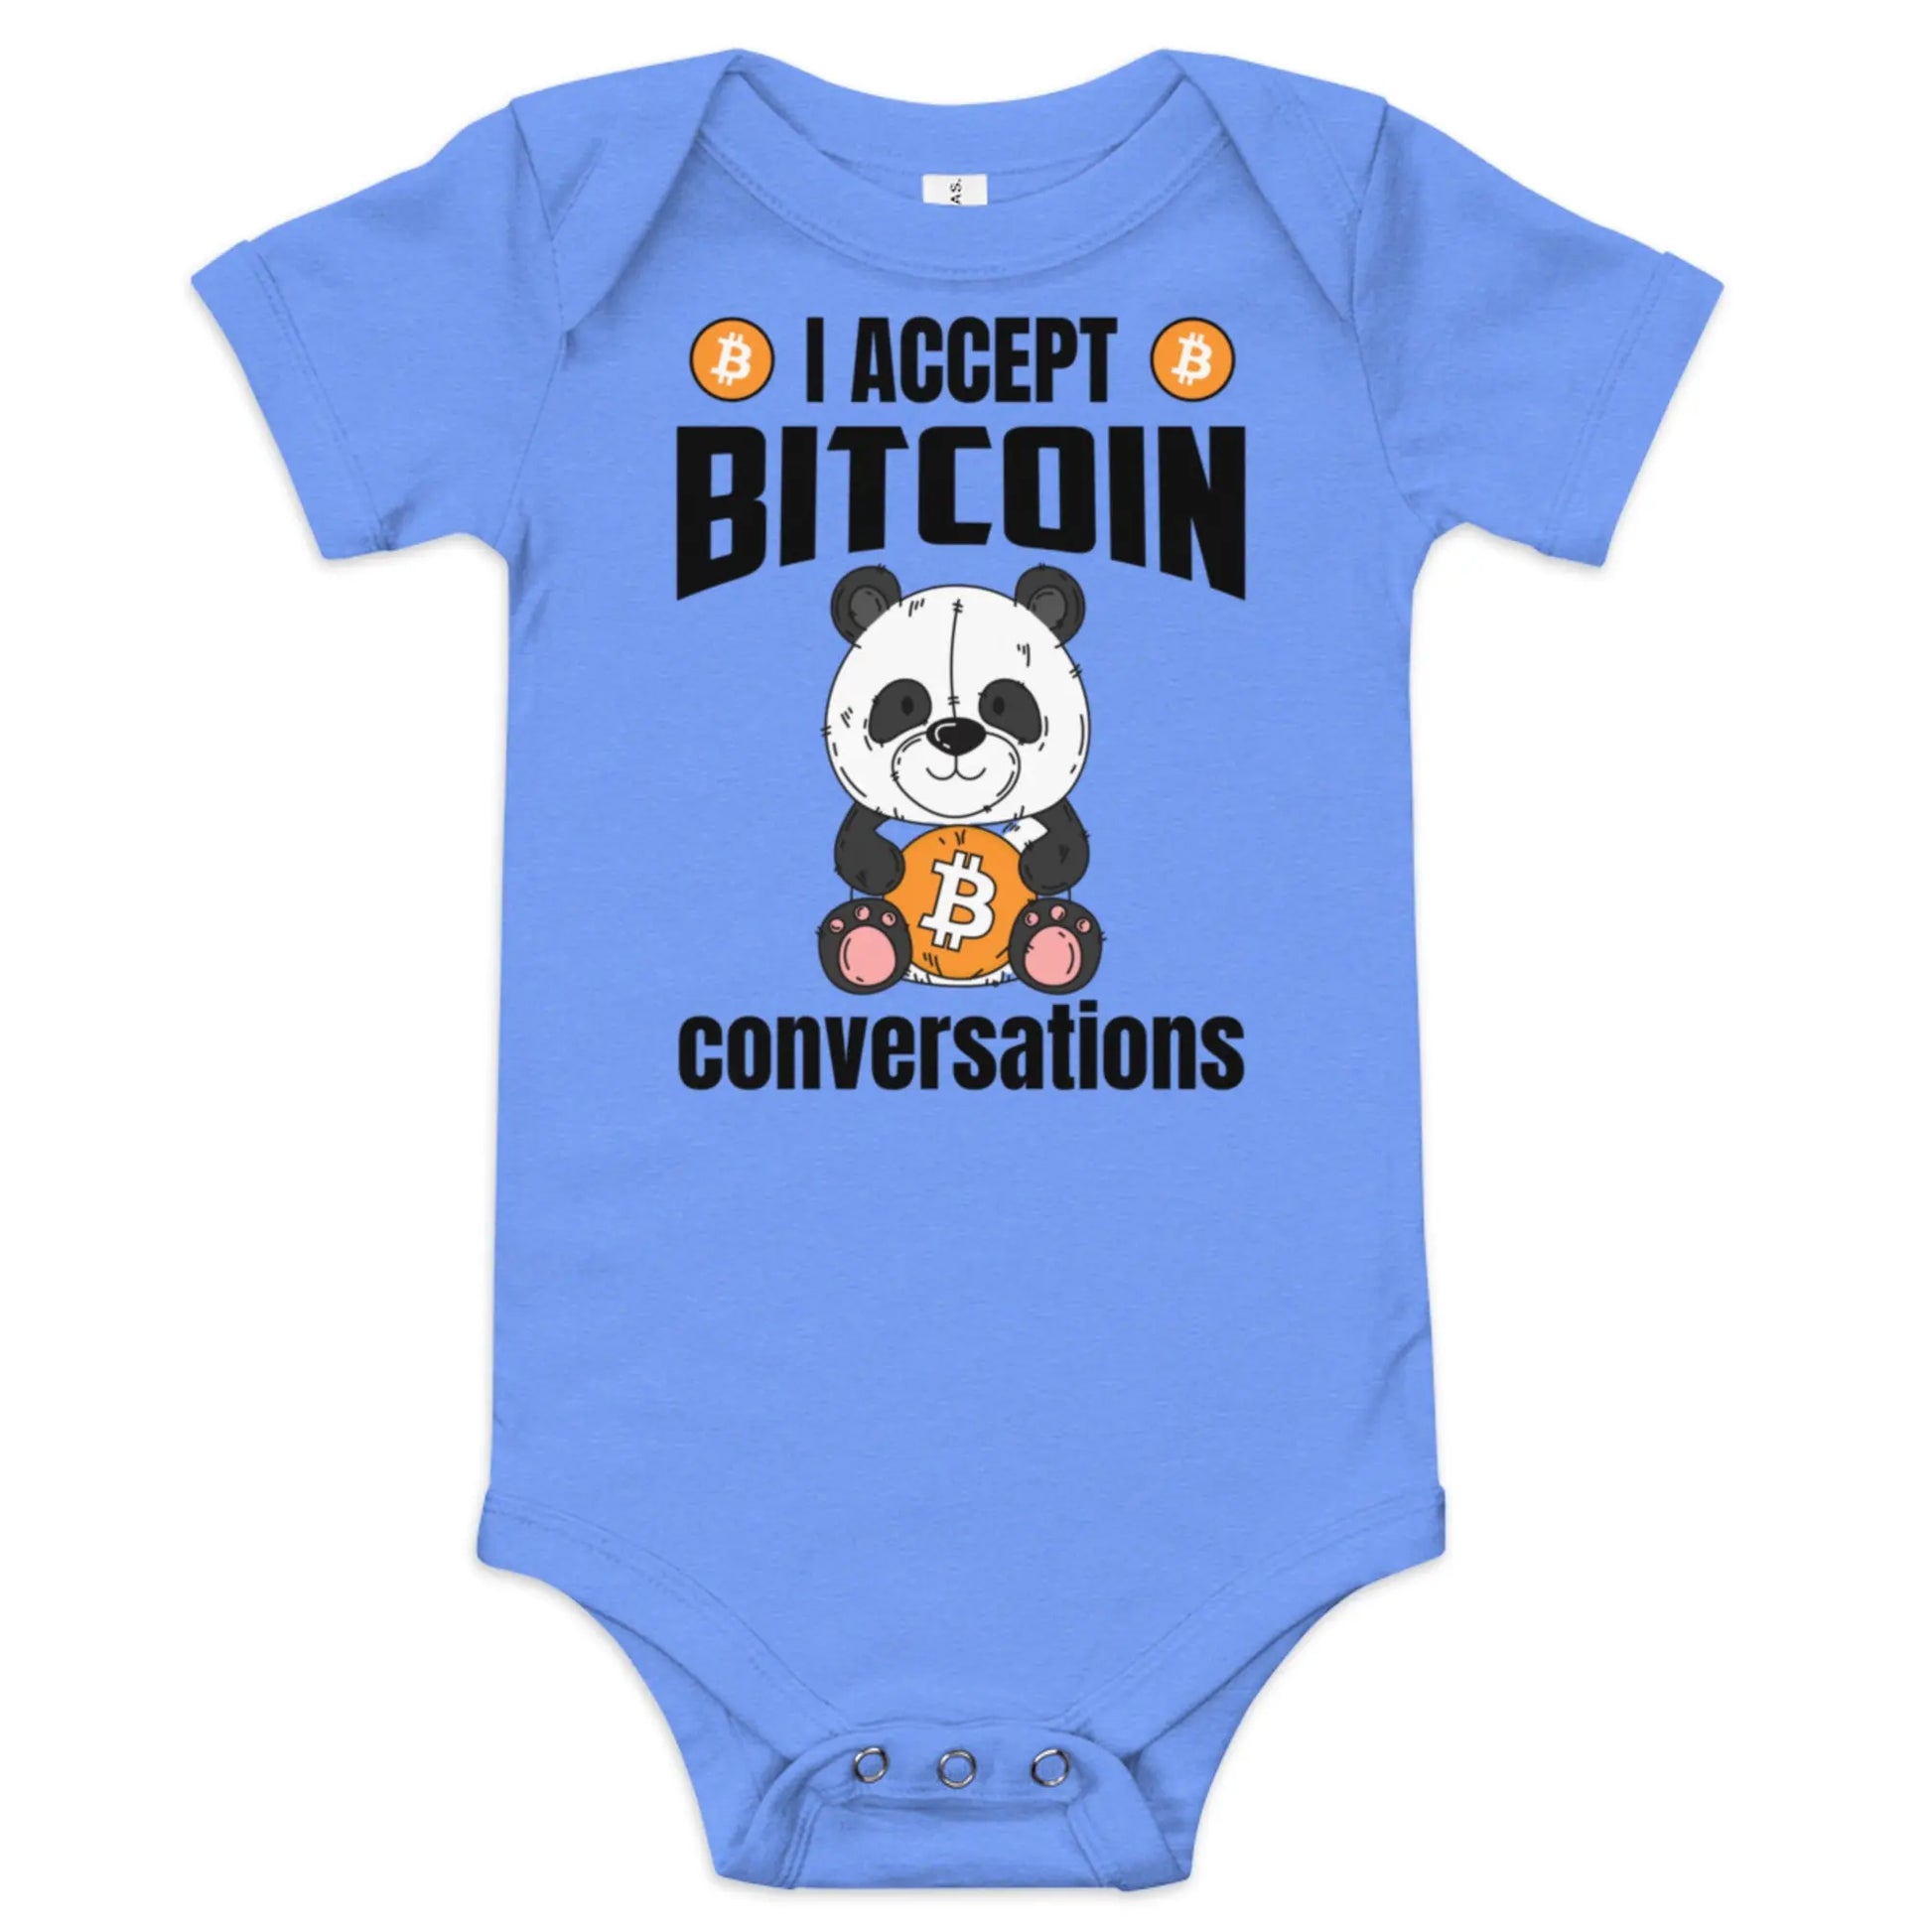 I Accept Bitcoin Conversations - Baby Bitcoin Body Suit - One Piece with Short Sleeve Blue